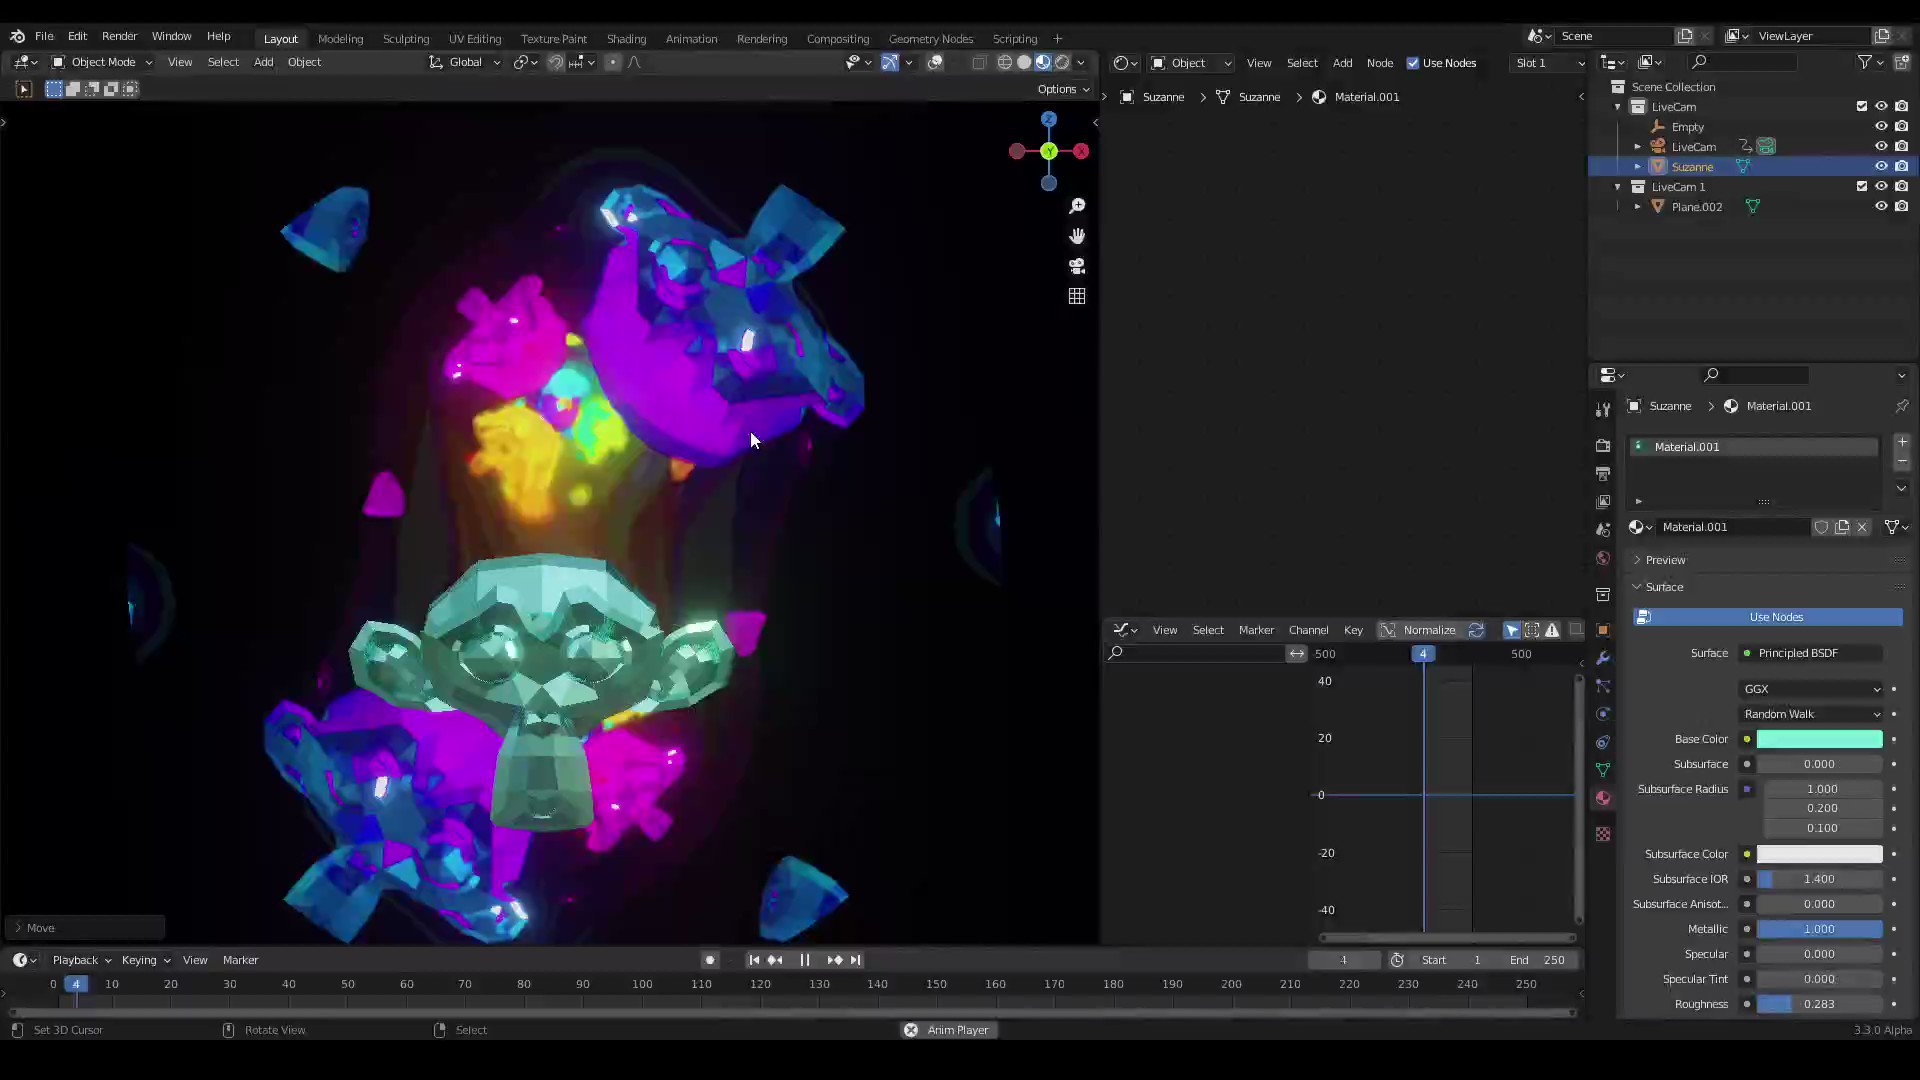 Igor Zdrowowicz on X: Realtime video feedback in blender viewport a.k.a.  Stoned Ape. Thanks @kolupsy for the awesome script! #blender #b3d #feedback  #loop #trippy #Suzanne  / X